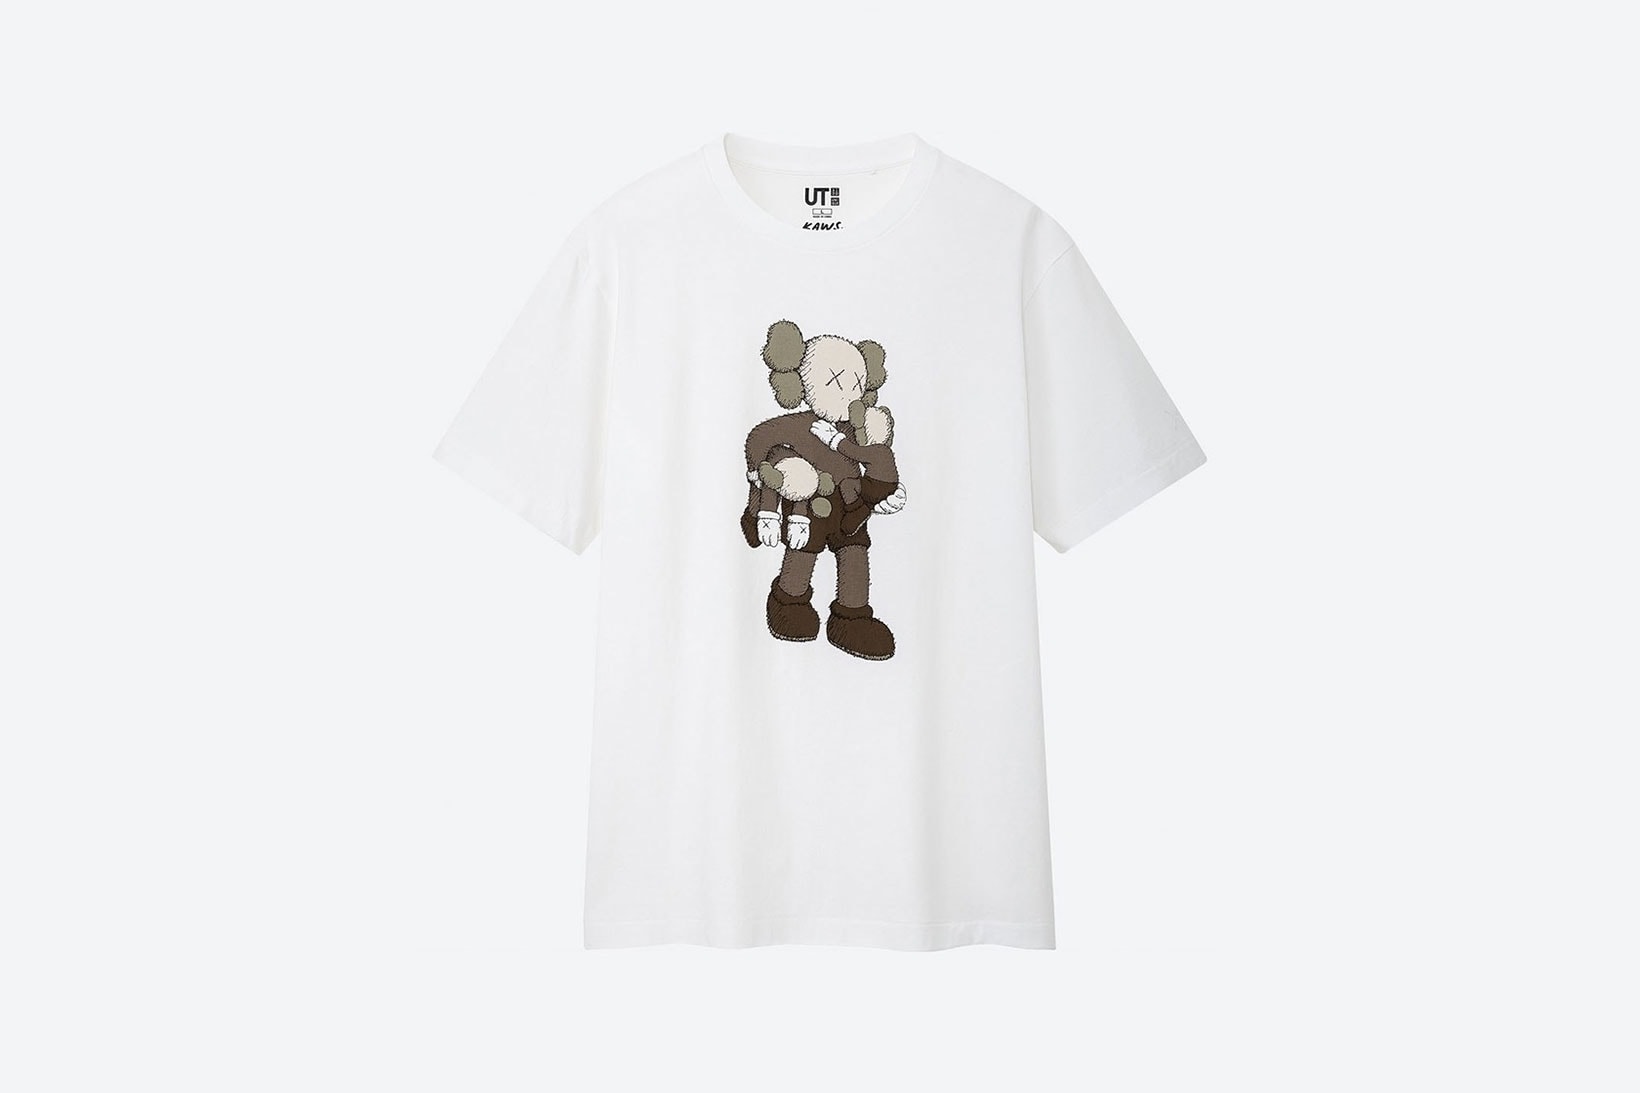 kaws uniqlo ut collection companion bff tshirts tote bags summer re release